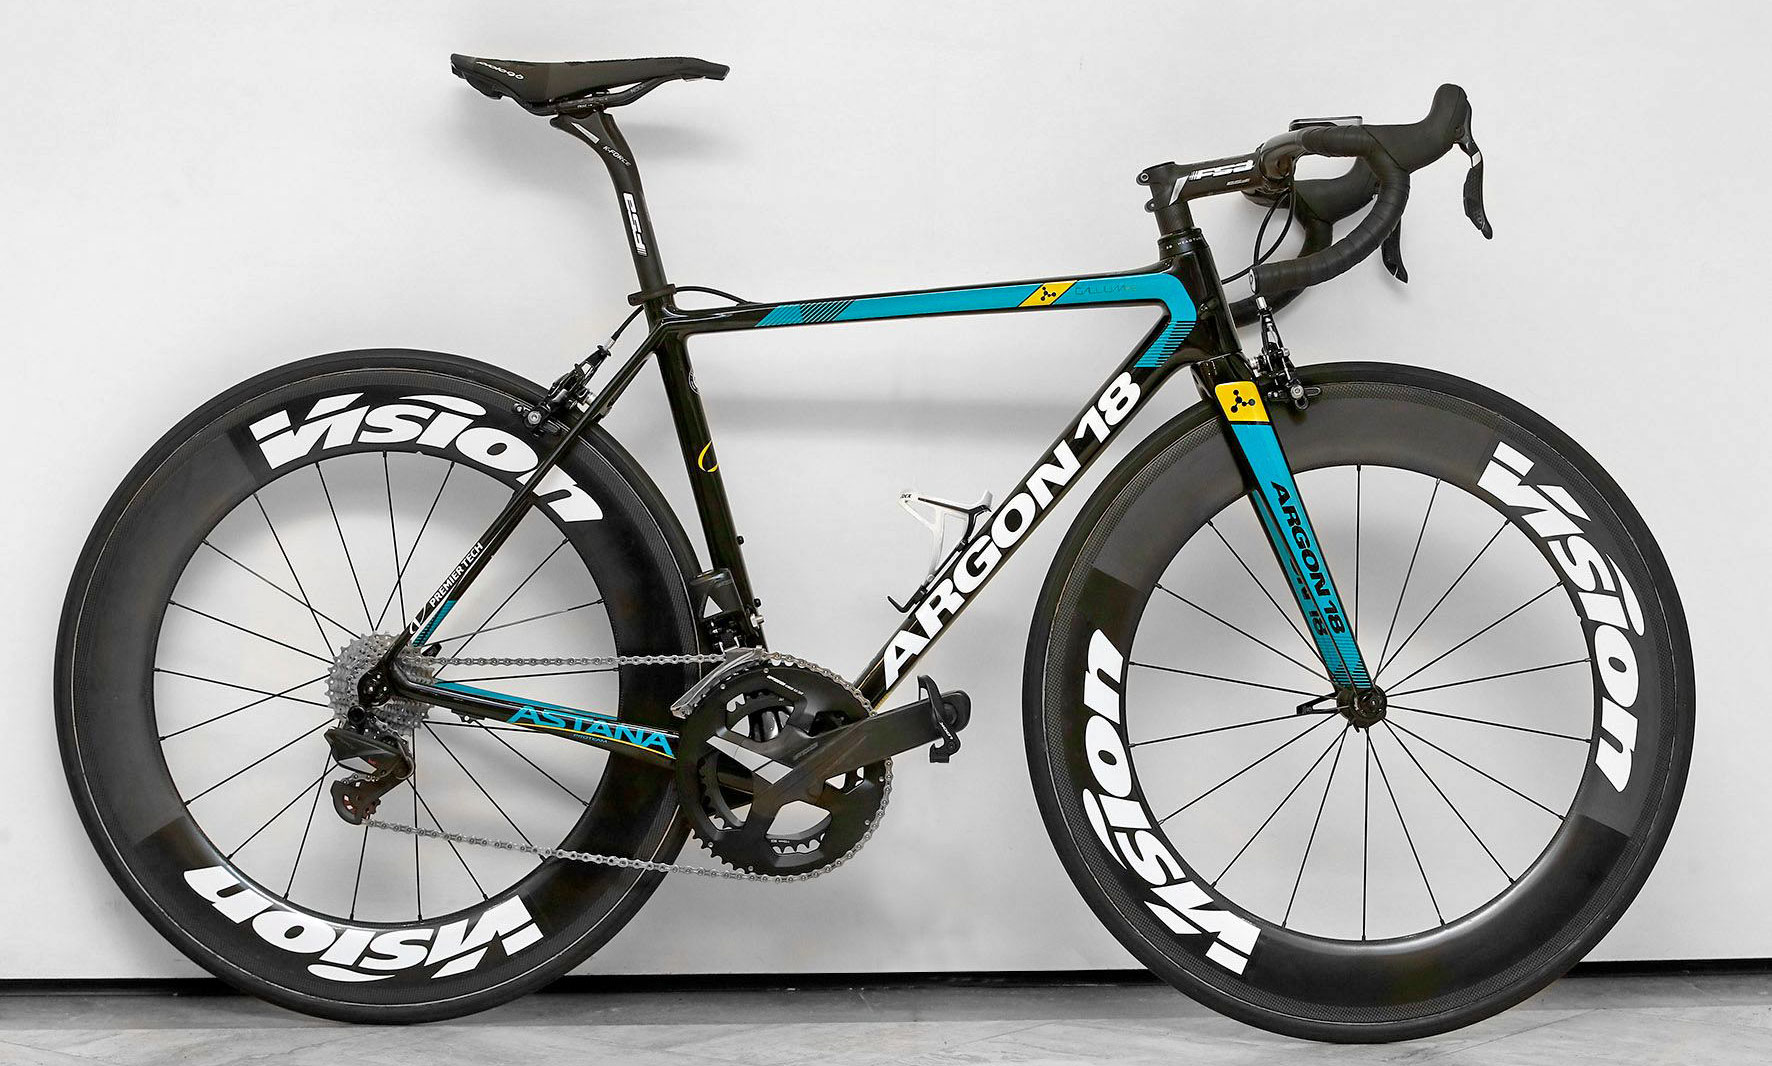 Astana & FSA tease K-Force WE equipped Argon18 bikes from training camp